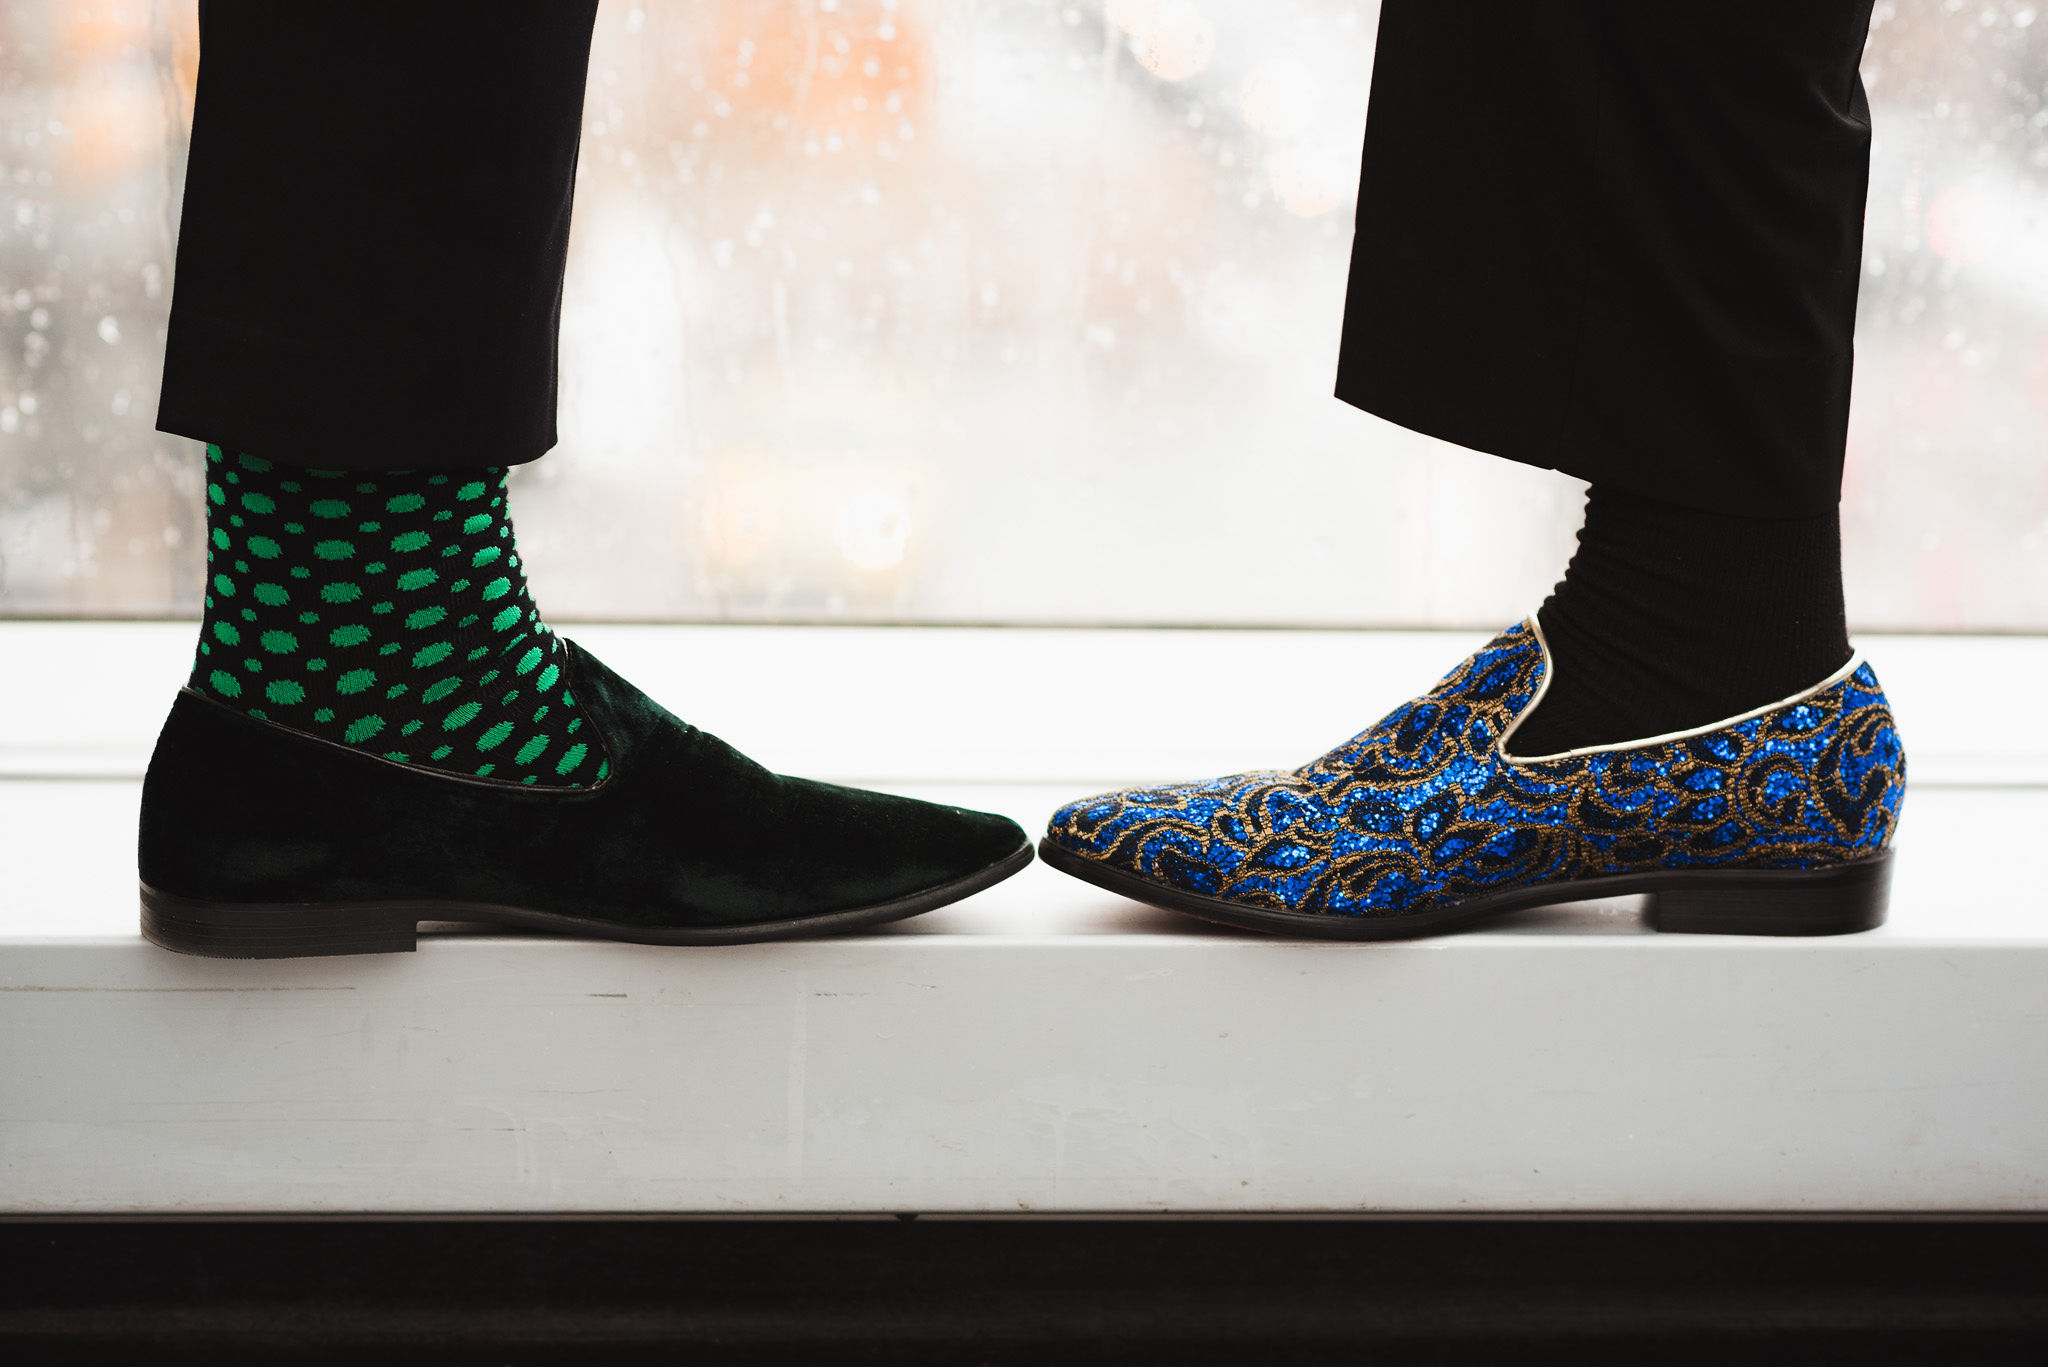 groom with black shoes and bright green socks and another groom with black socks and bright blue shoes before their wedding at the Hilton Fallsview in Niagara Falls